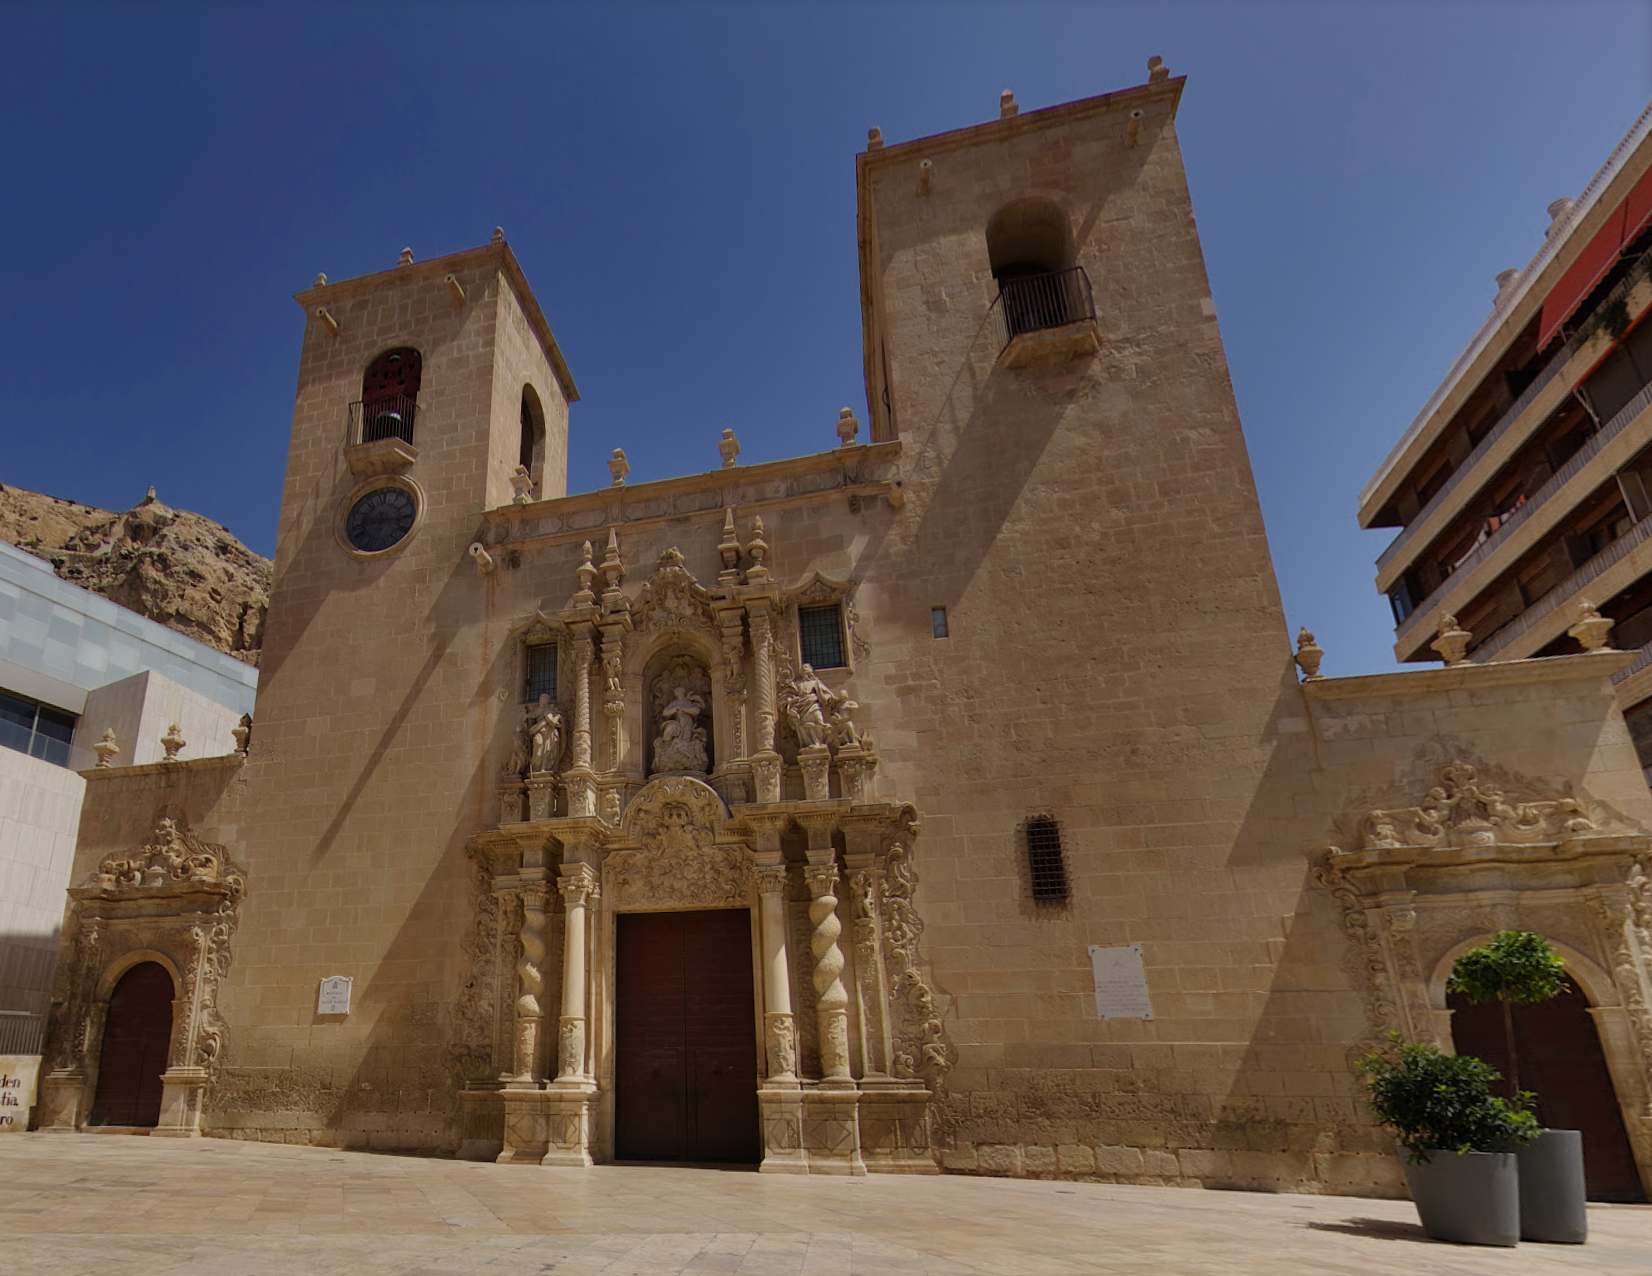 Basilica of St Mary of Alicante by Google Earth